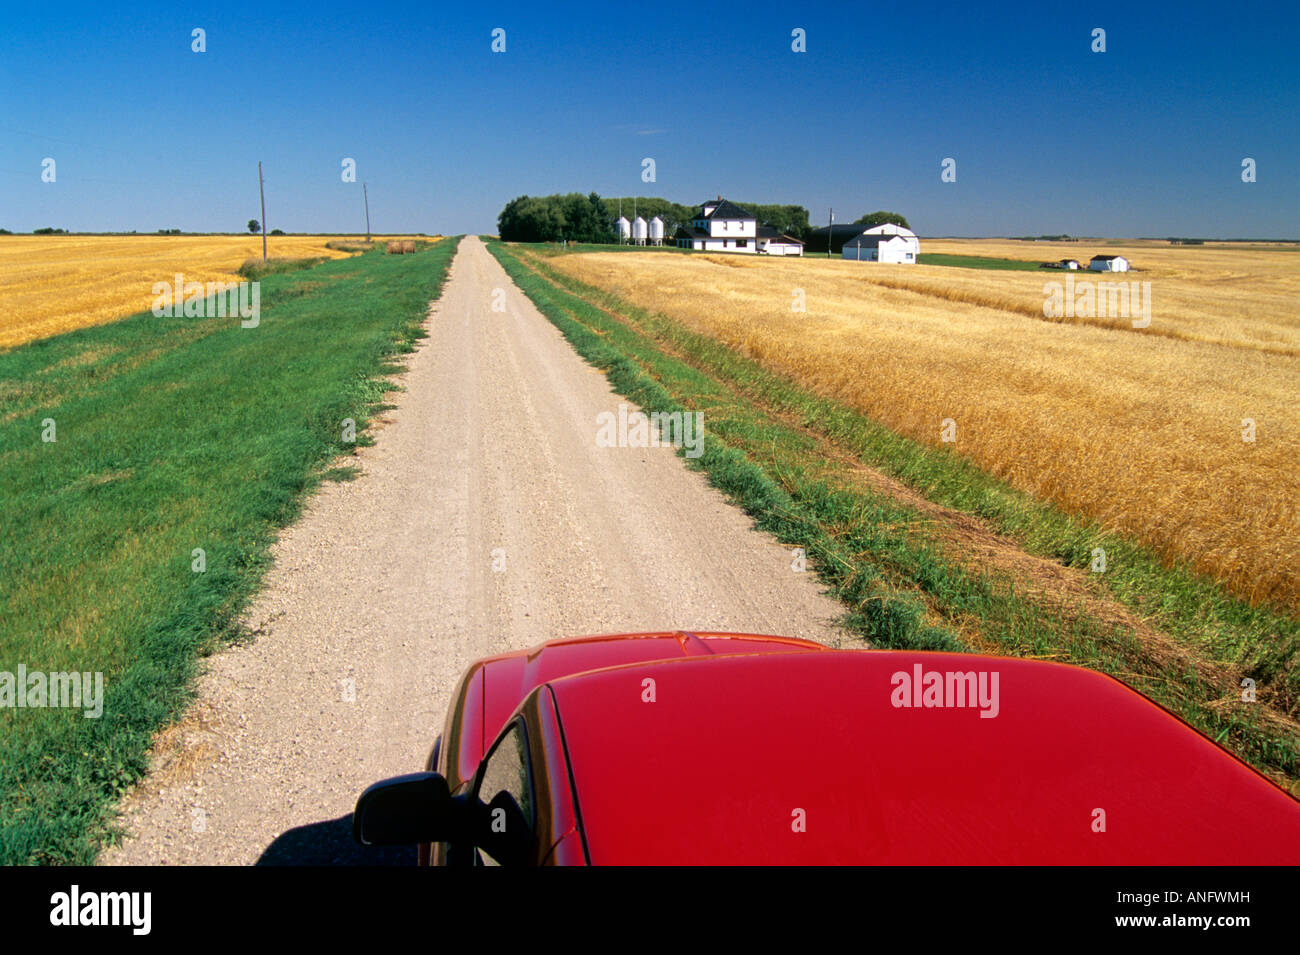 Truck on country road through wheat fields, Tiger Hills, Manitoba, Canada. Stock Photo